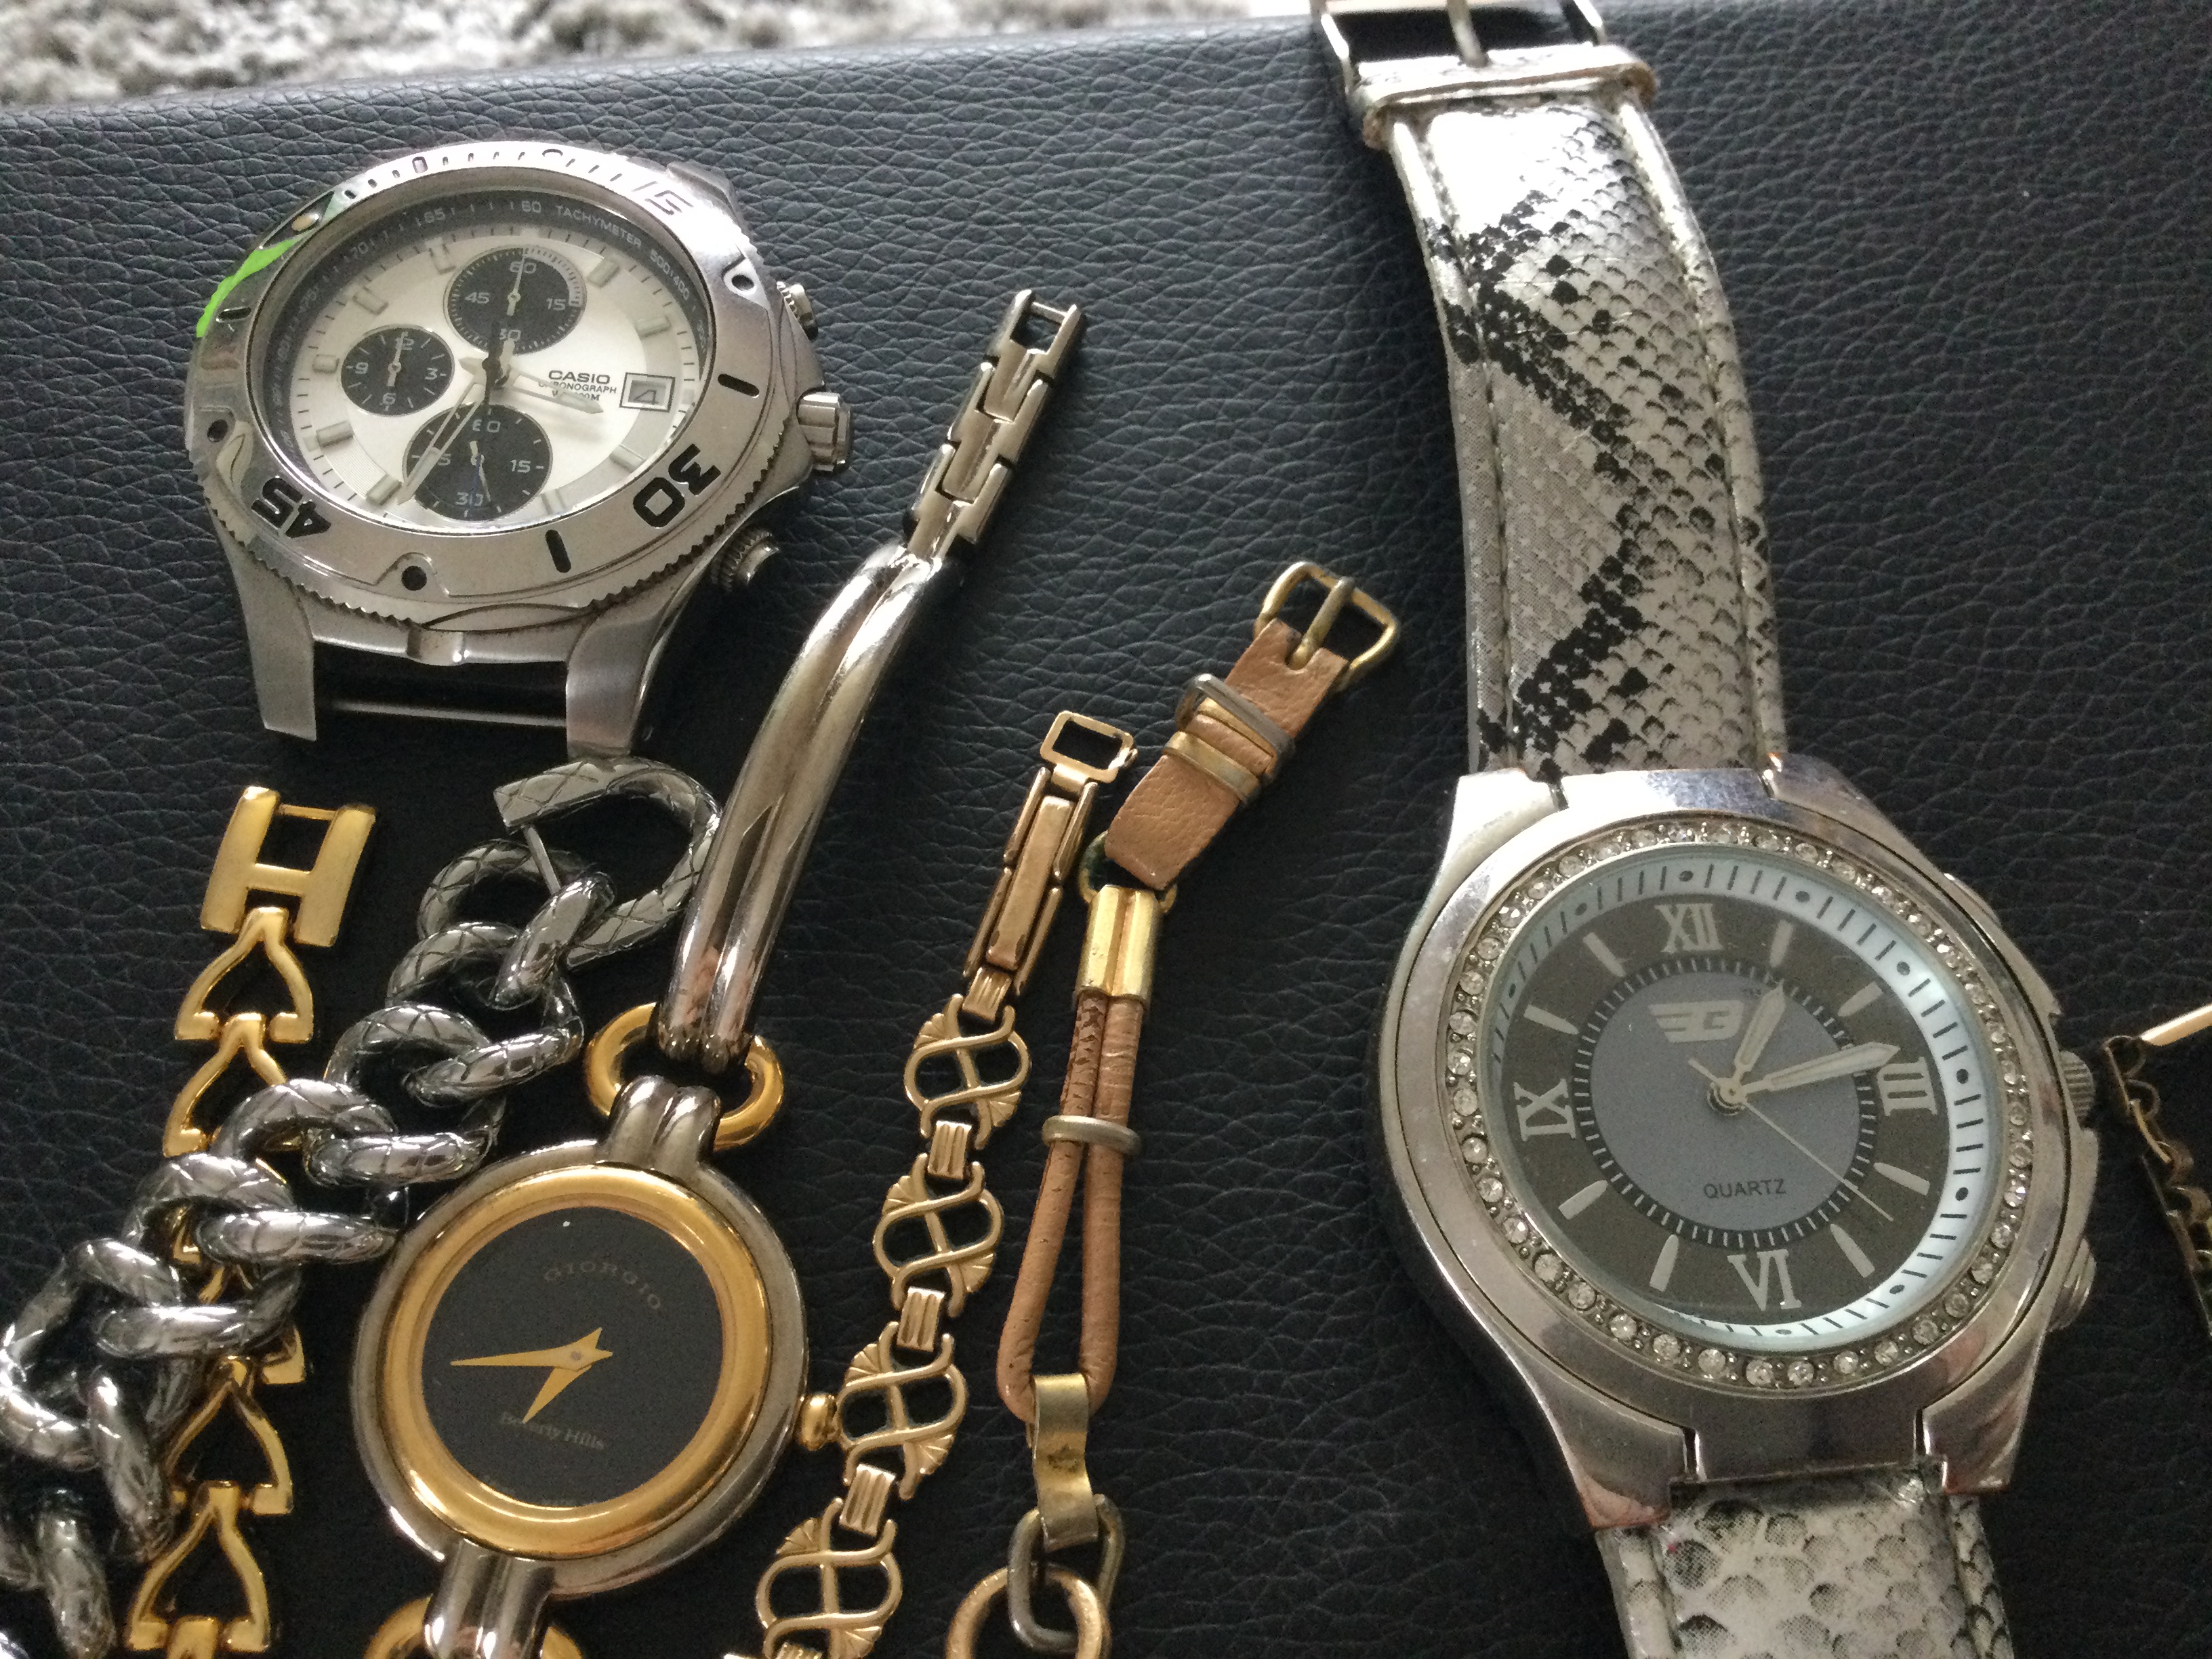 Collection of 11 Watches, Next, Cavalli, Ice, Giorgio, Nelson Etc (GS 29) - Image 7 of 7